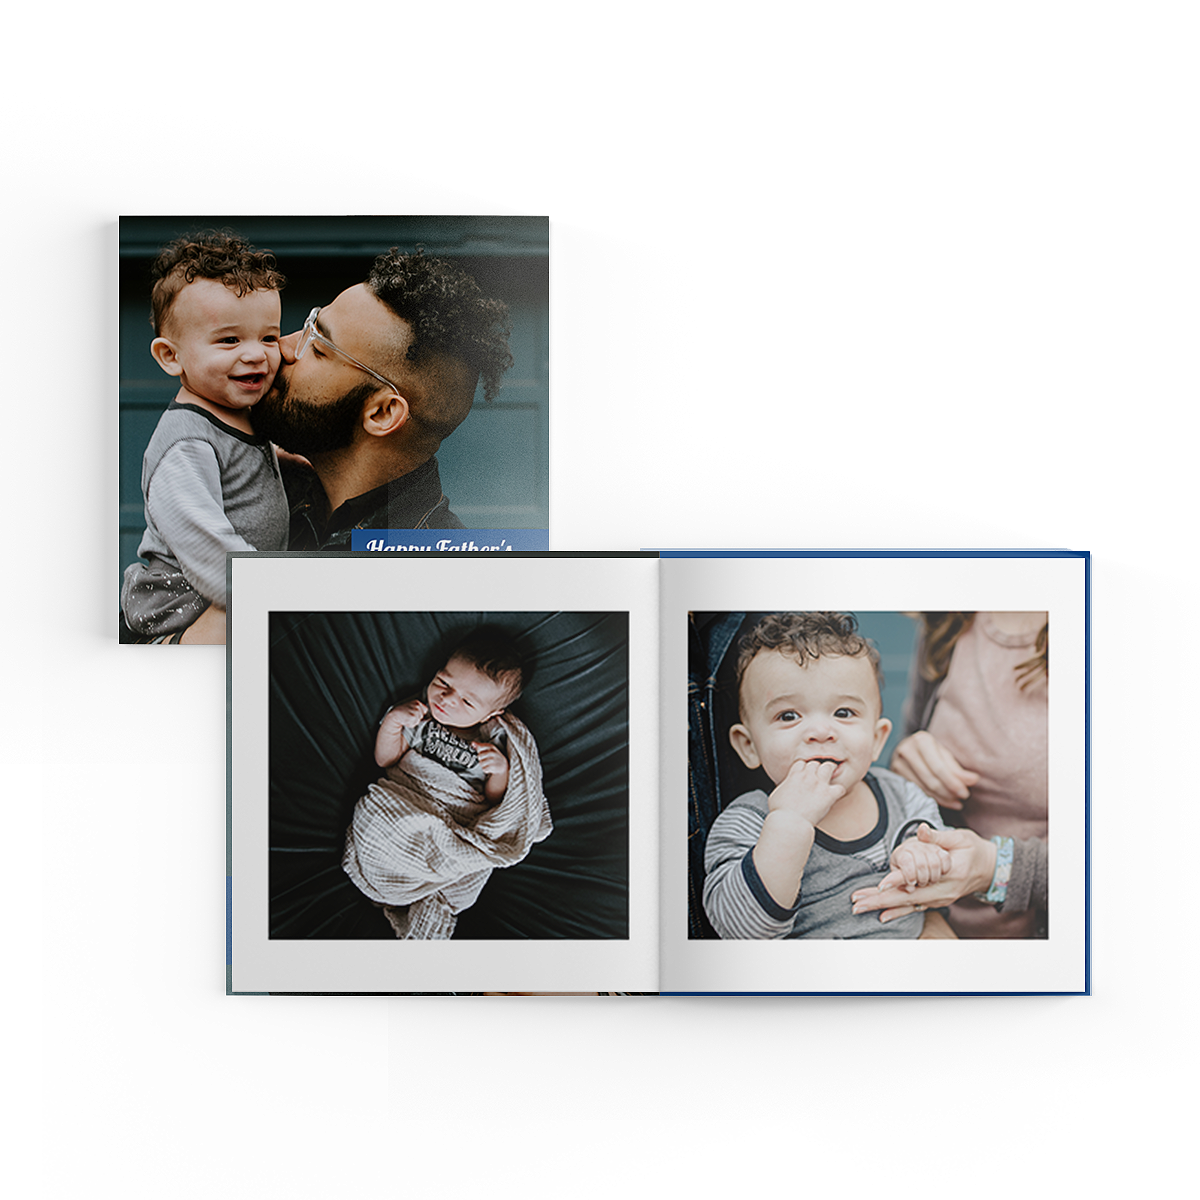 Father's Day Photobook